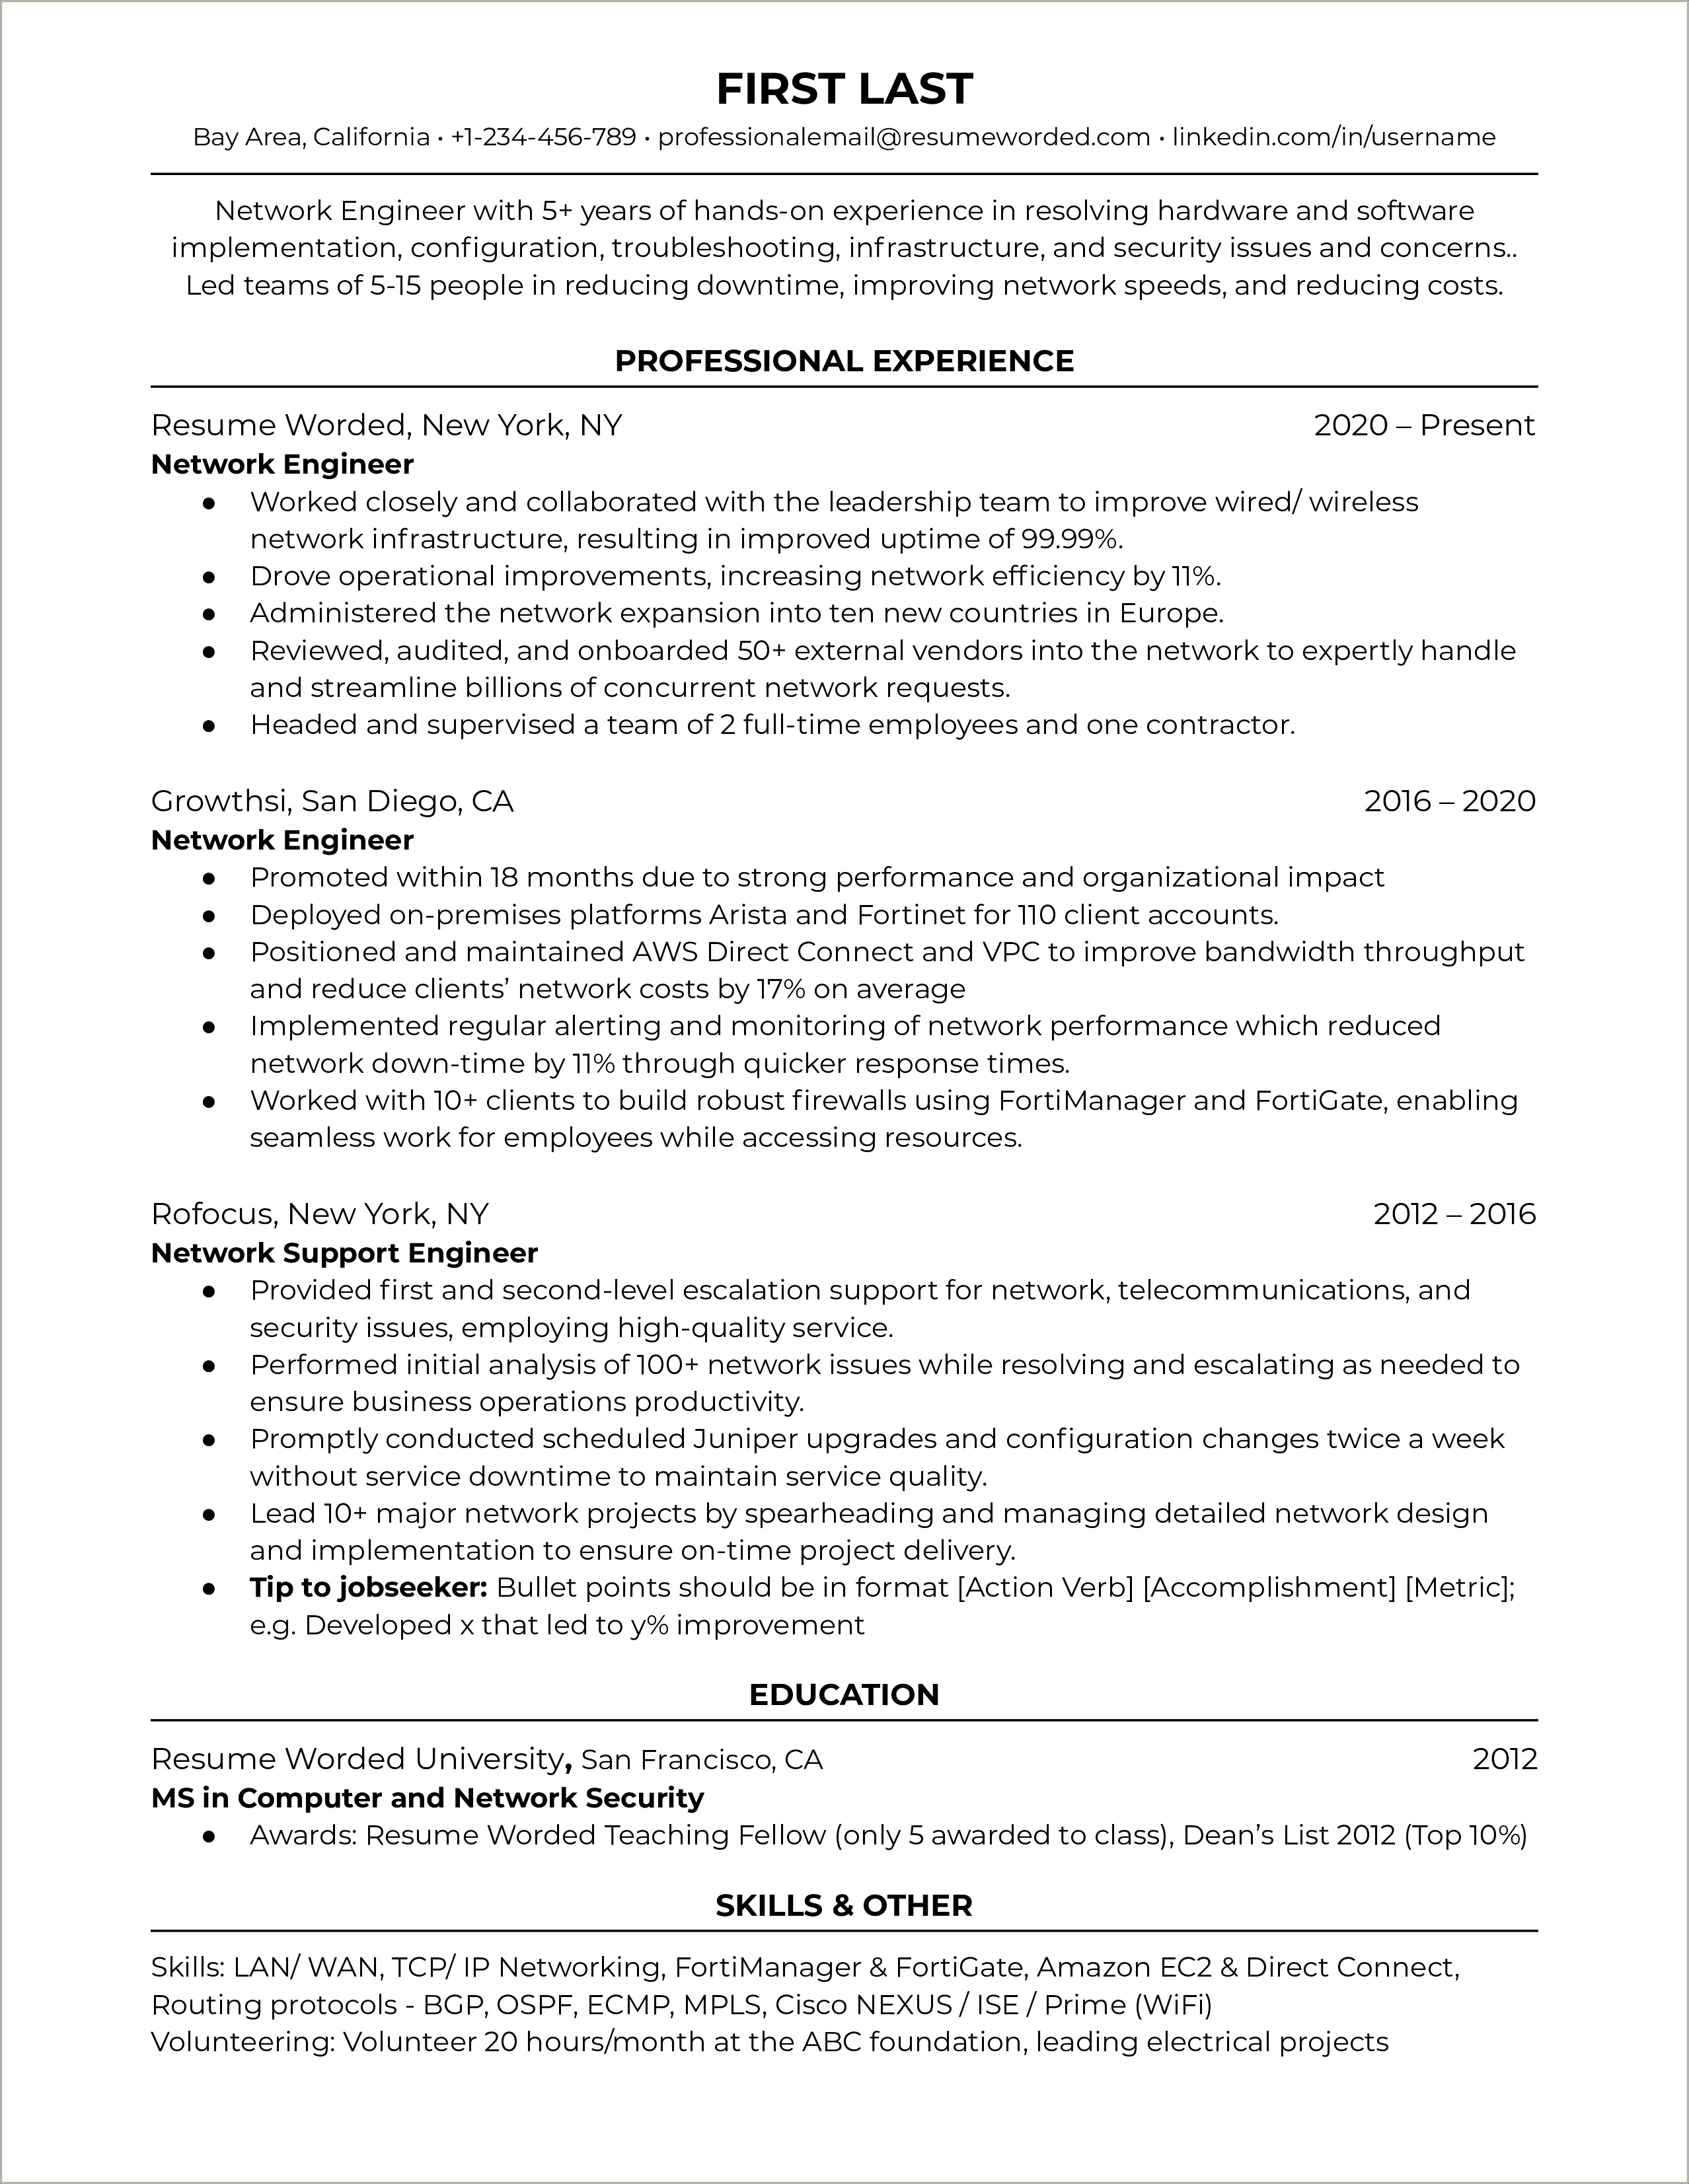 Resume For Electrical Engineer With 6 Years Experience